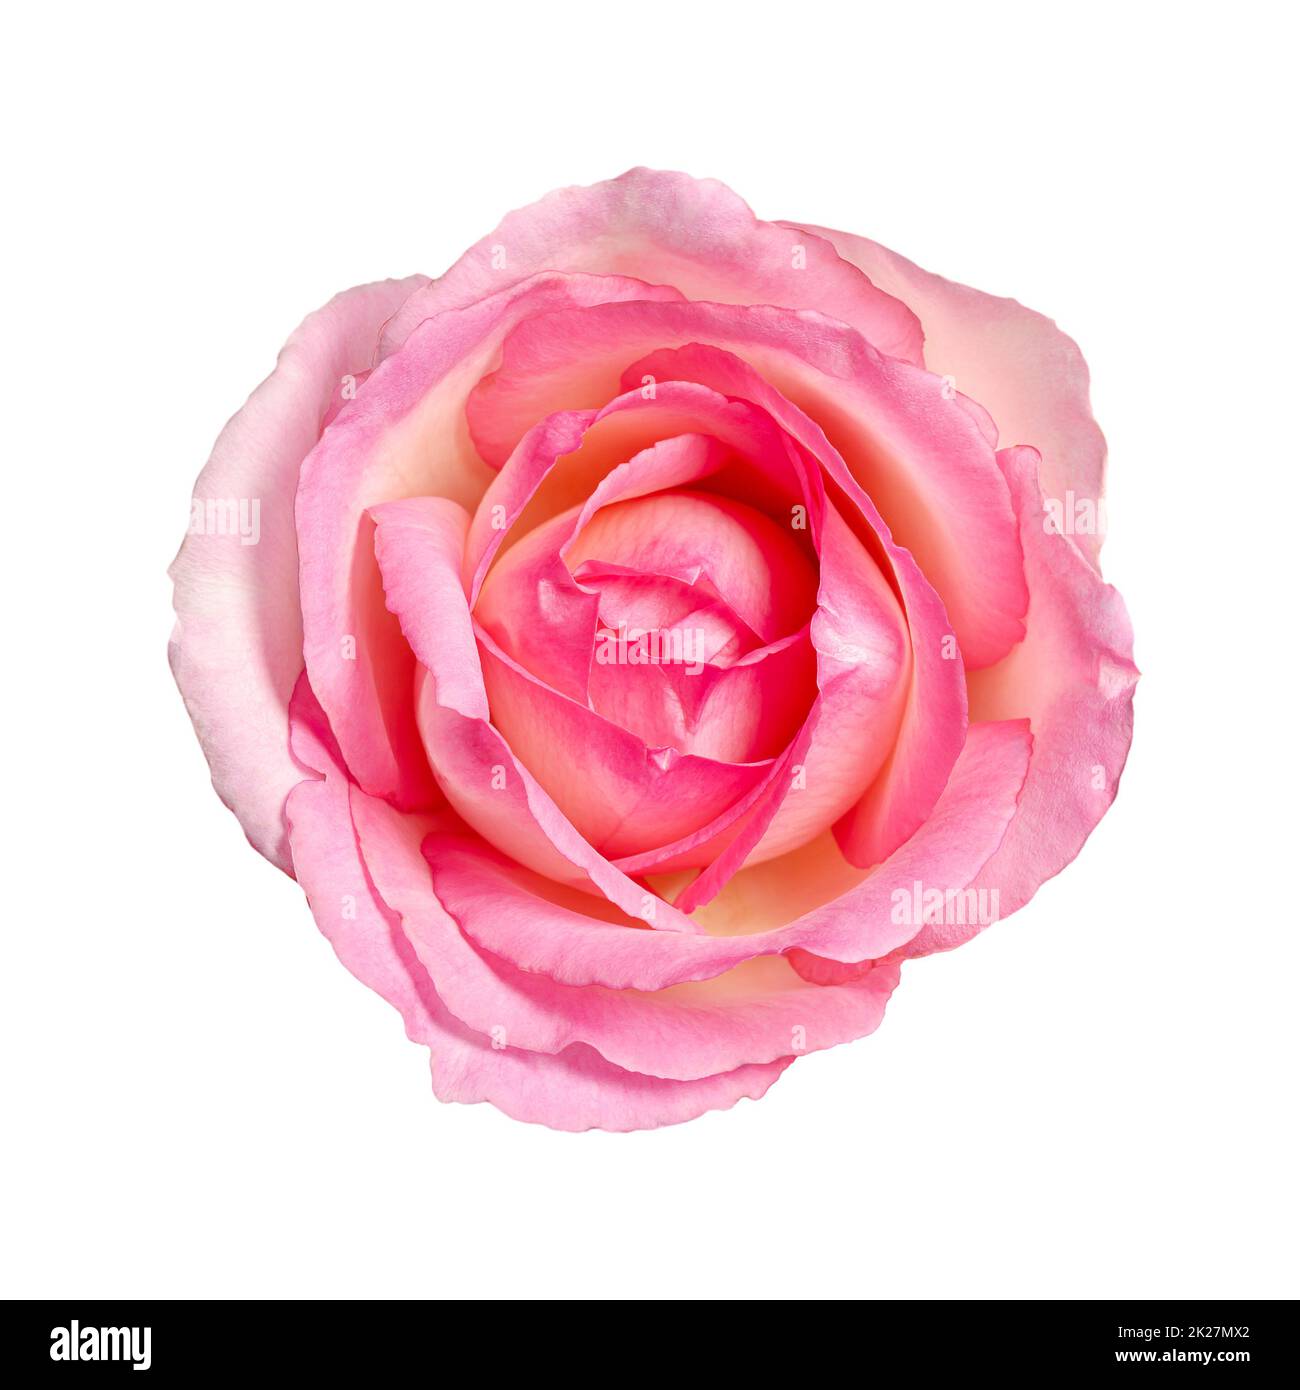 Rose blossom, flower head from above, isolated, on white background Stock Photo